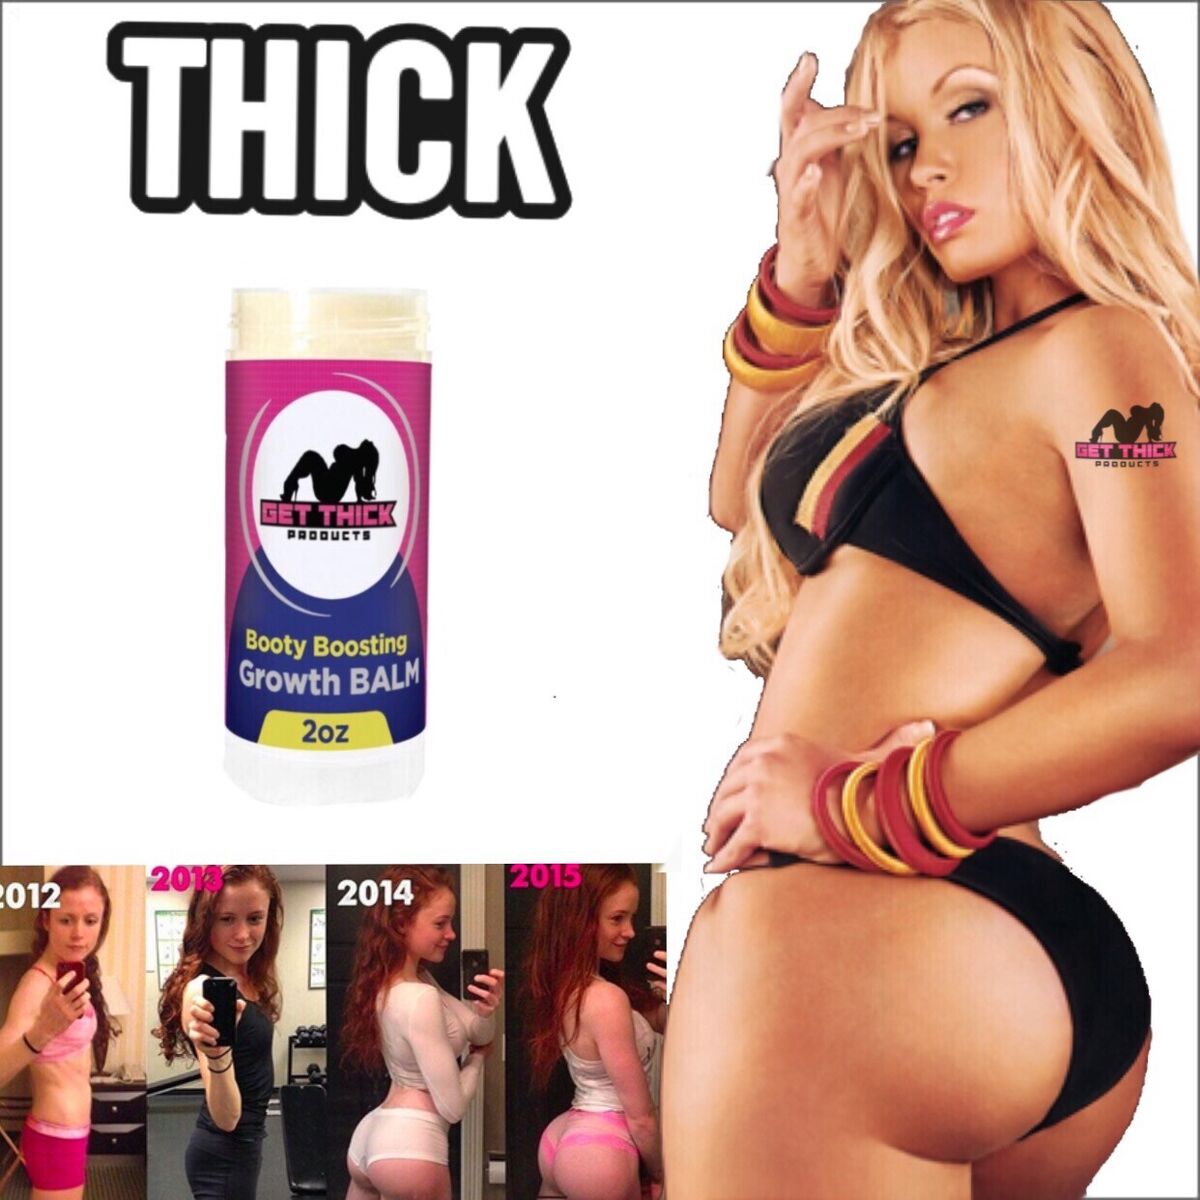 bryan mack recommends thick booty images pic